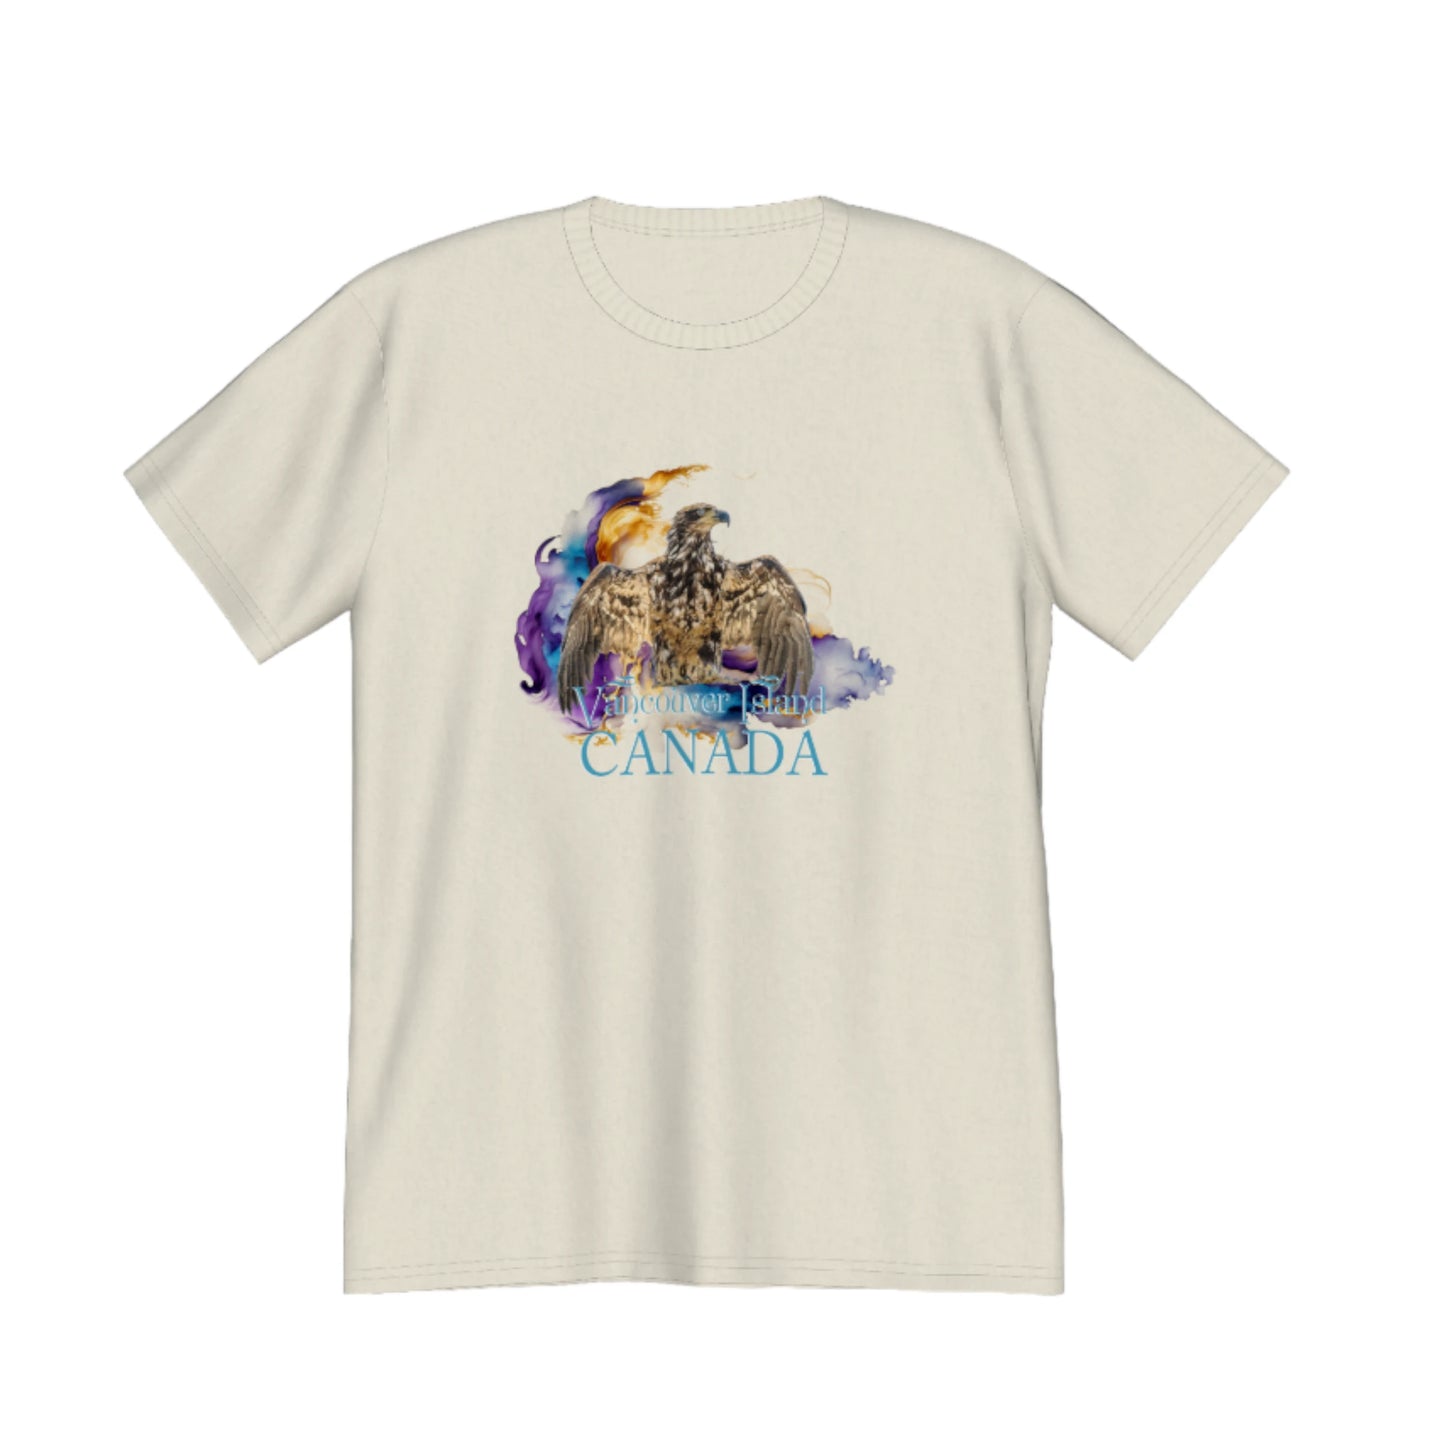 Thunderbird Vancouver Island Canada Premium Unisex T-shirt. The image is of a eagle in the thunderbird position with a colourful abstract background.  The word below the image read Vancouver island, Canada. by van isle goddess dot com